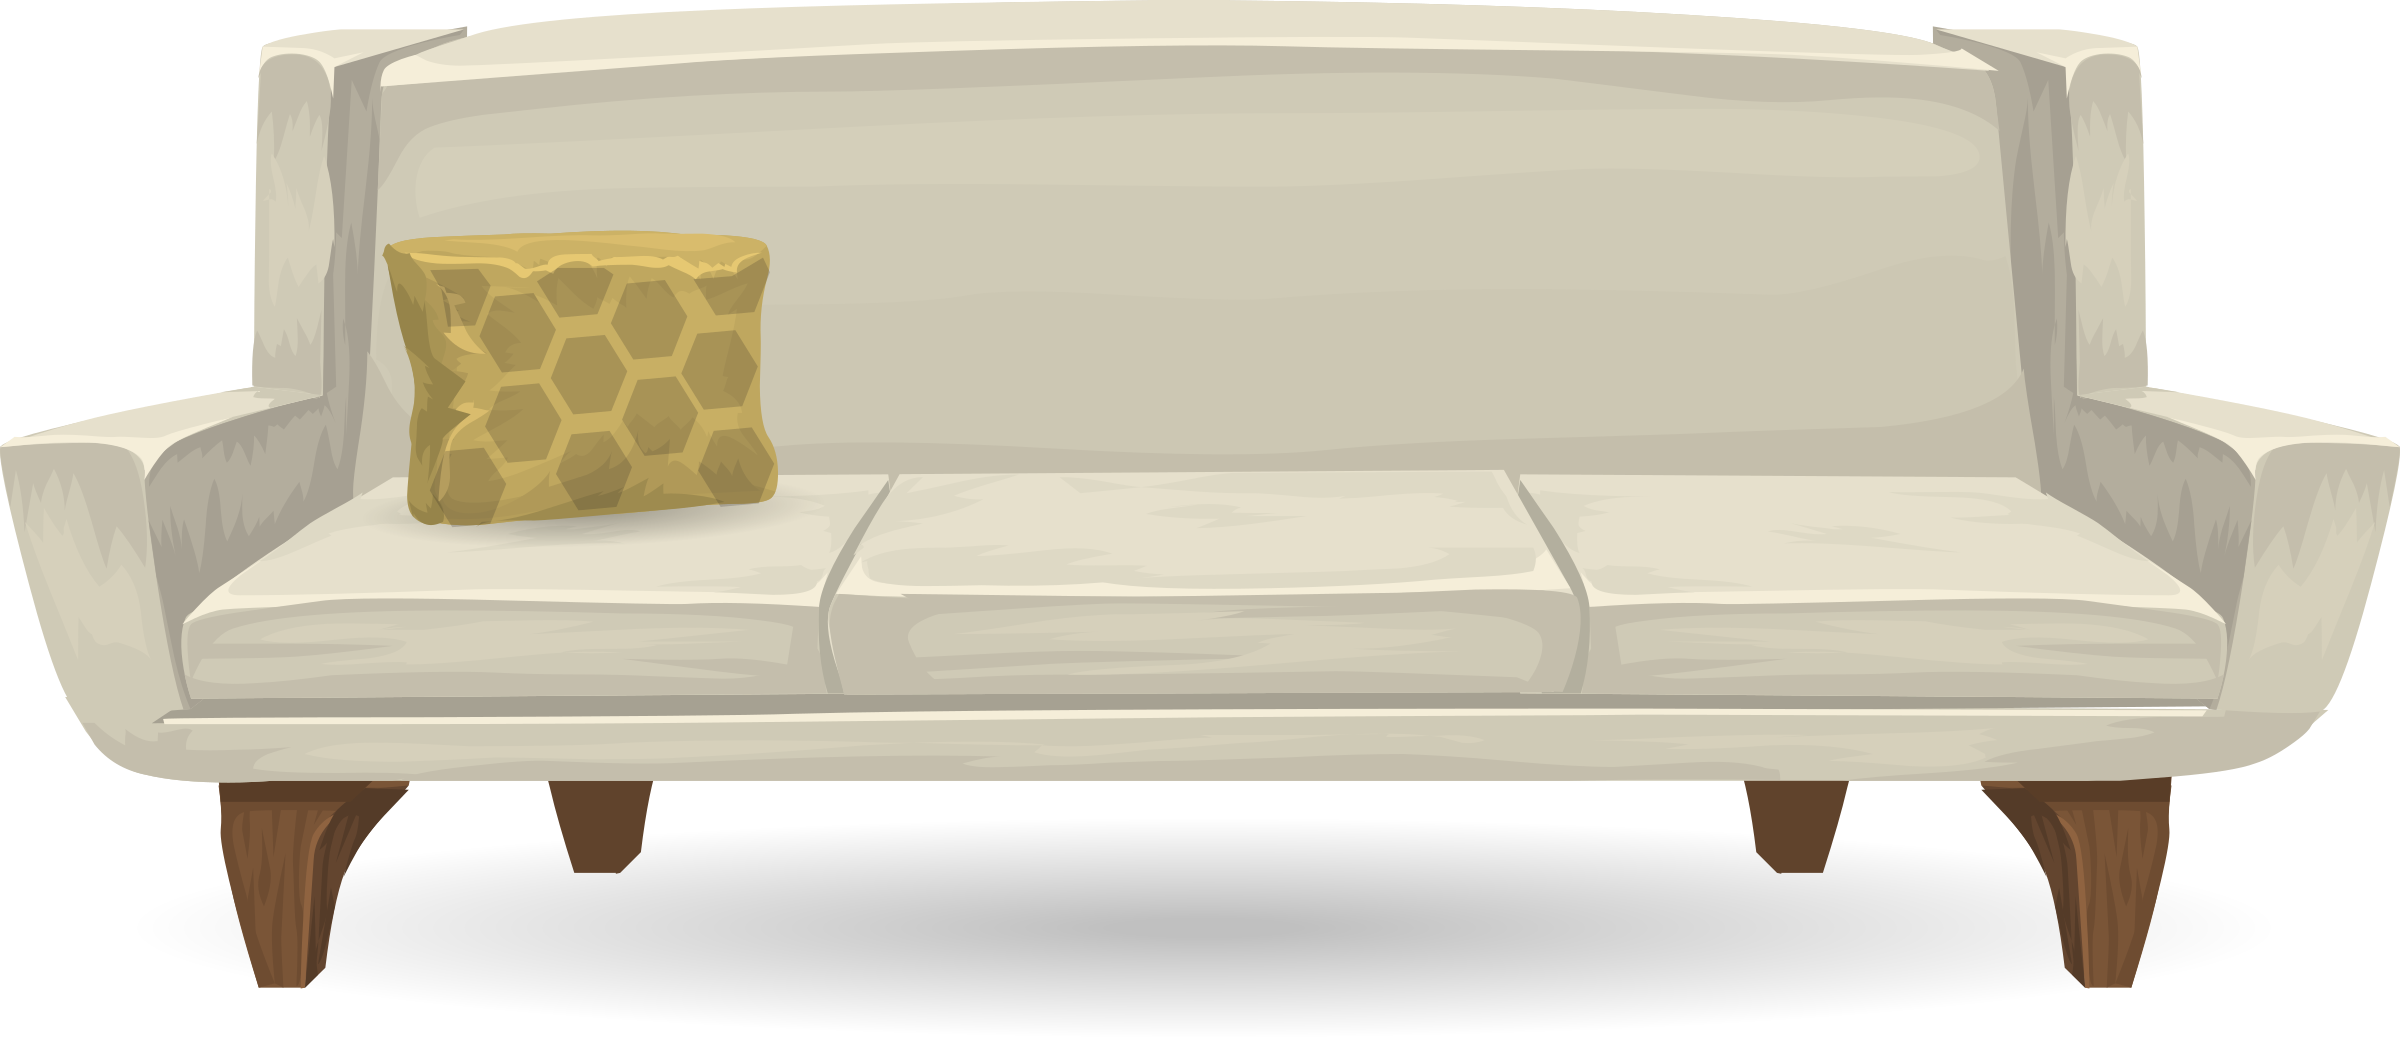 HD This Free Icons Png Design Of Danish Modern Sofa From